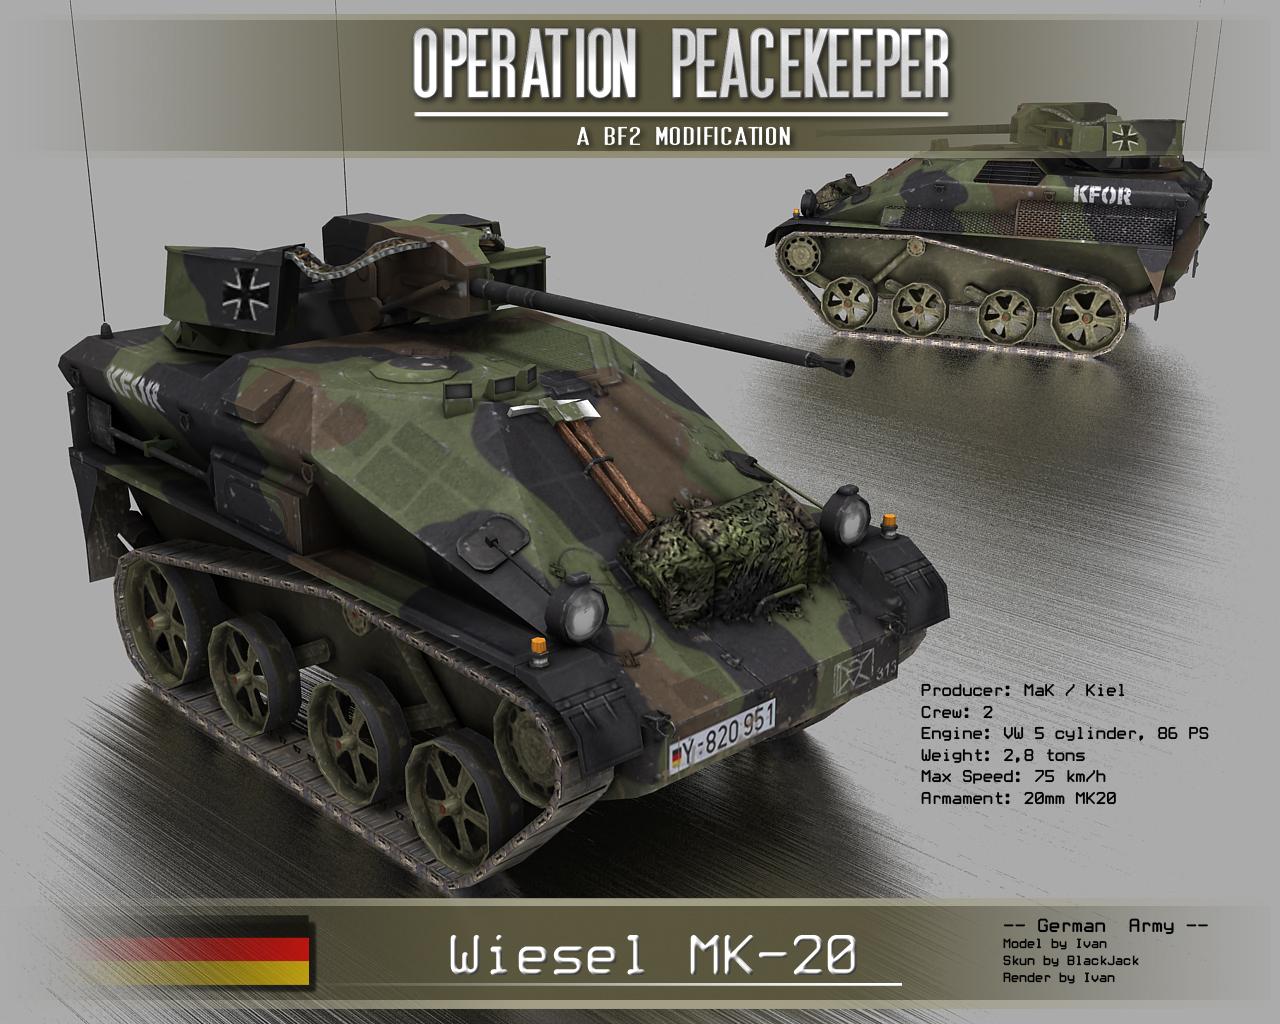 Wiesel MK-20 tiny tank image - Operation Peacekeeper 2 mod for